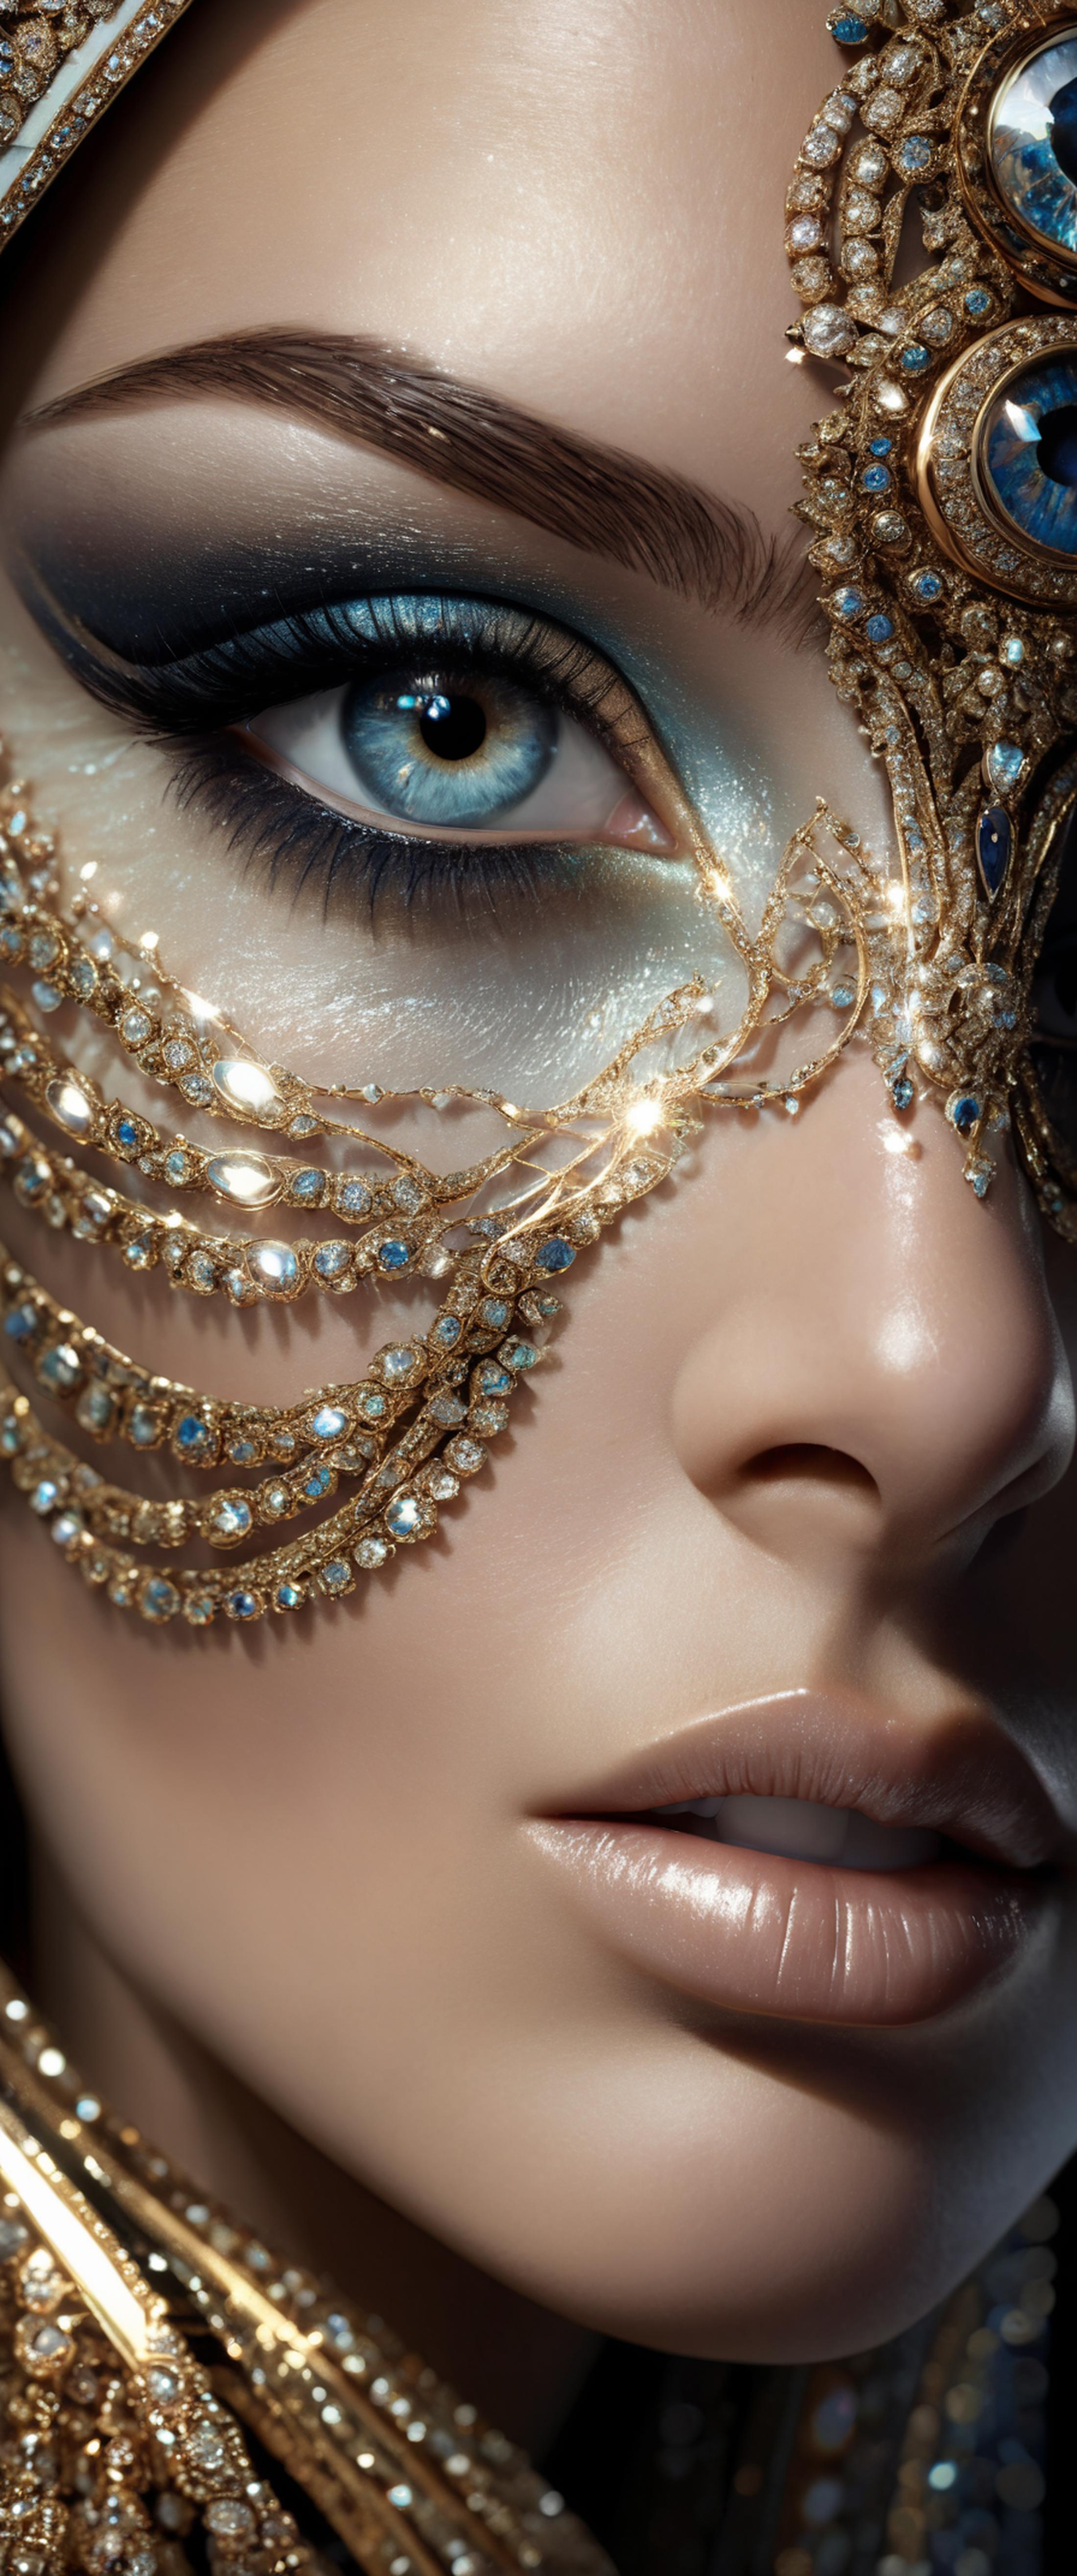 A close-up of a woman's face wearing a gold and blue mask with blue eyeshadow.